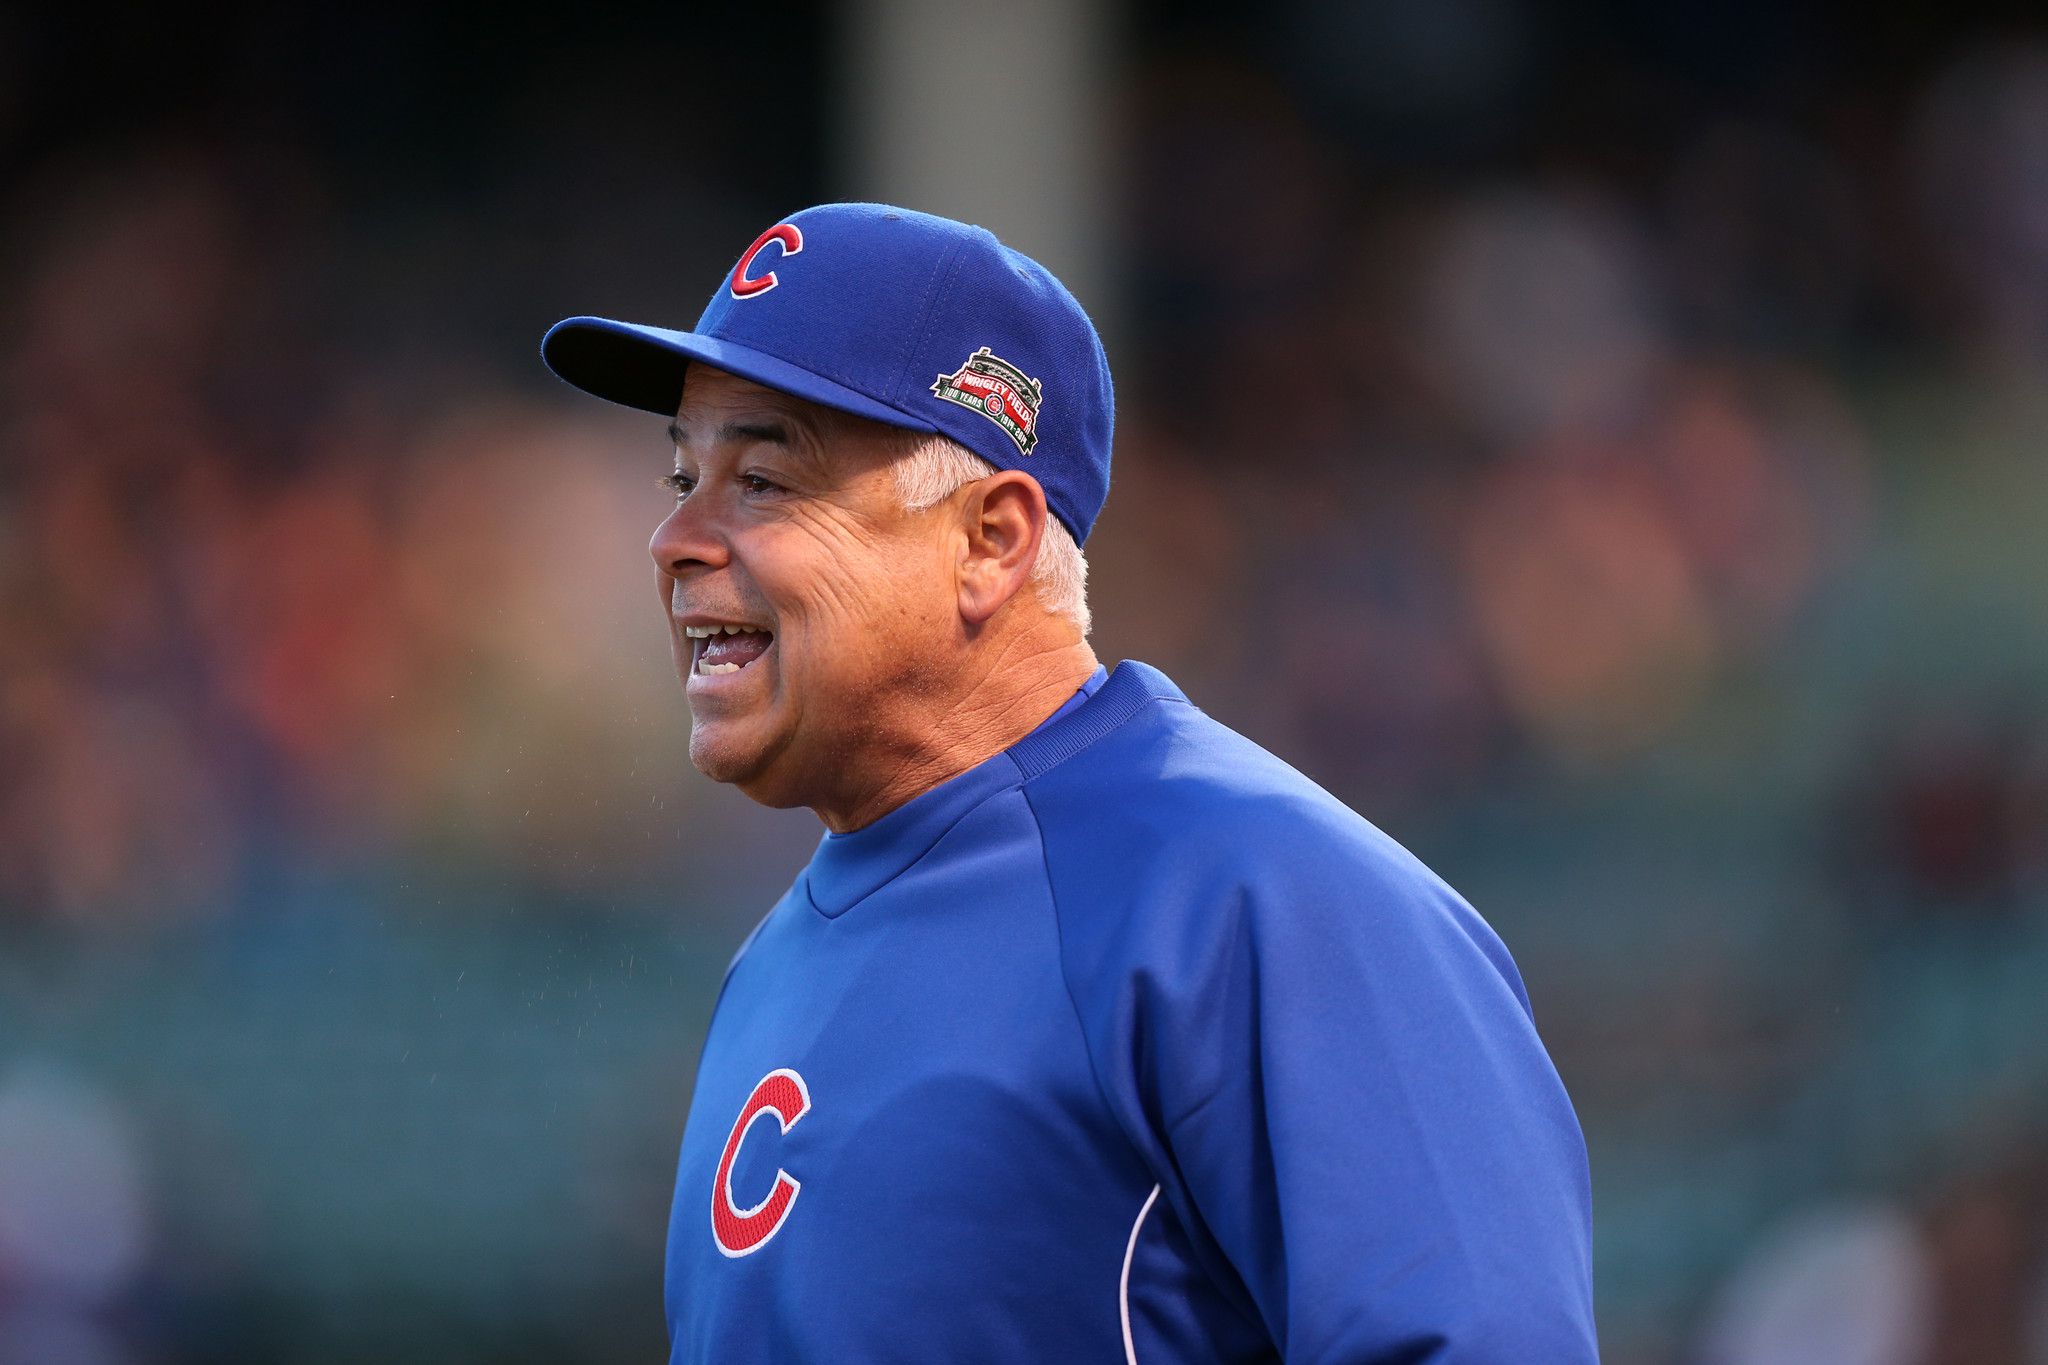 Chicago Cubs manager Lou Piniella reacts after umpire's call on a